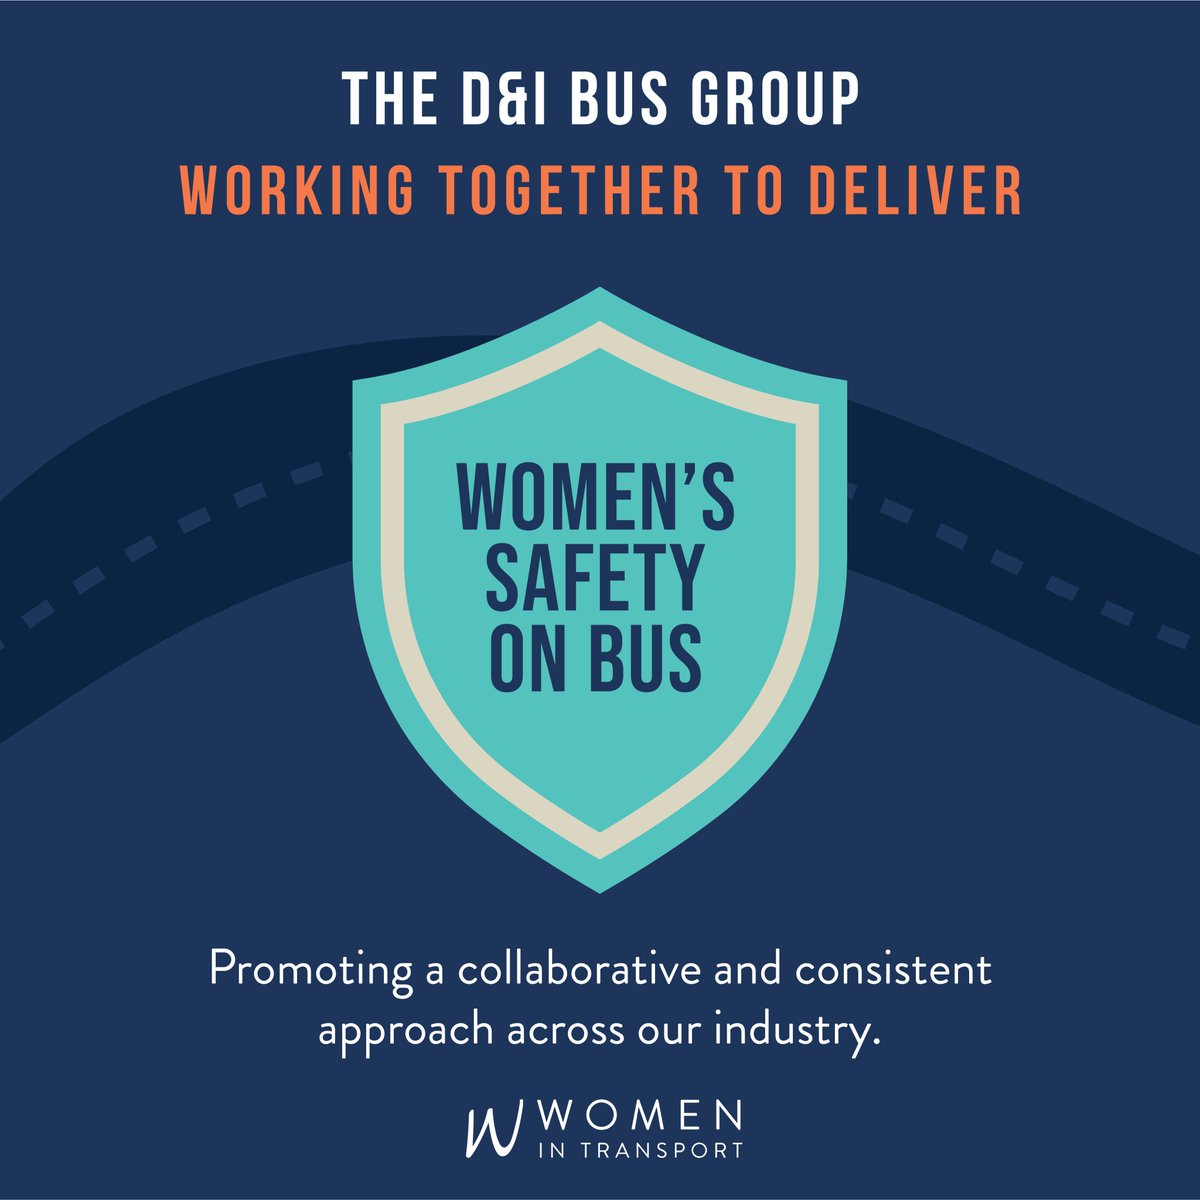 One of the D&I Bus Group’s key deliverables #WomensSafetyOnBus We continue to work with partners to influence policy and promote actions that champion the safety of women working or travelling on bus. Join us womenintransport.com/bus #womenintransport